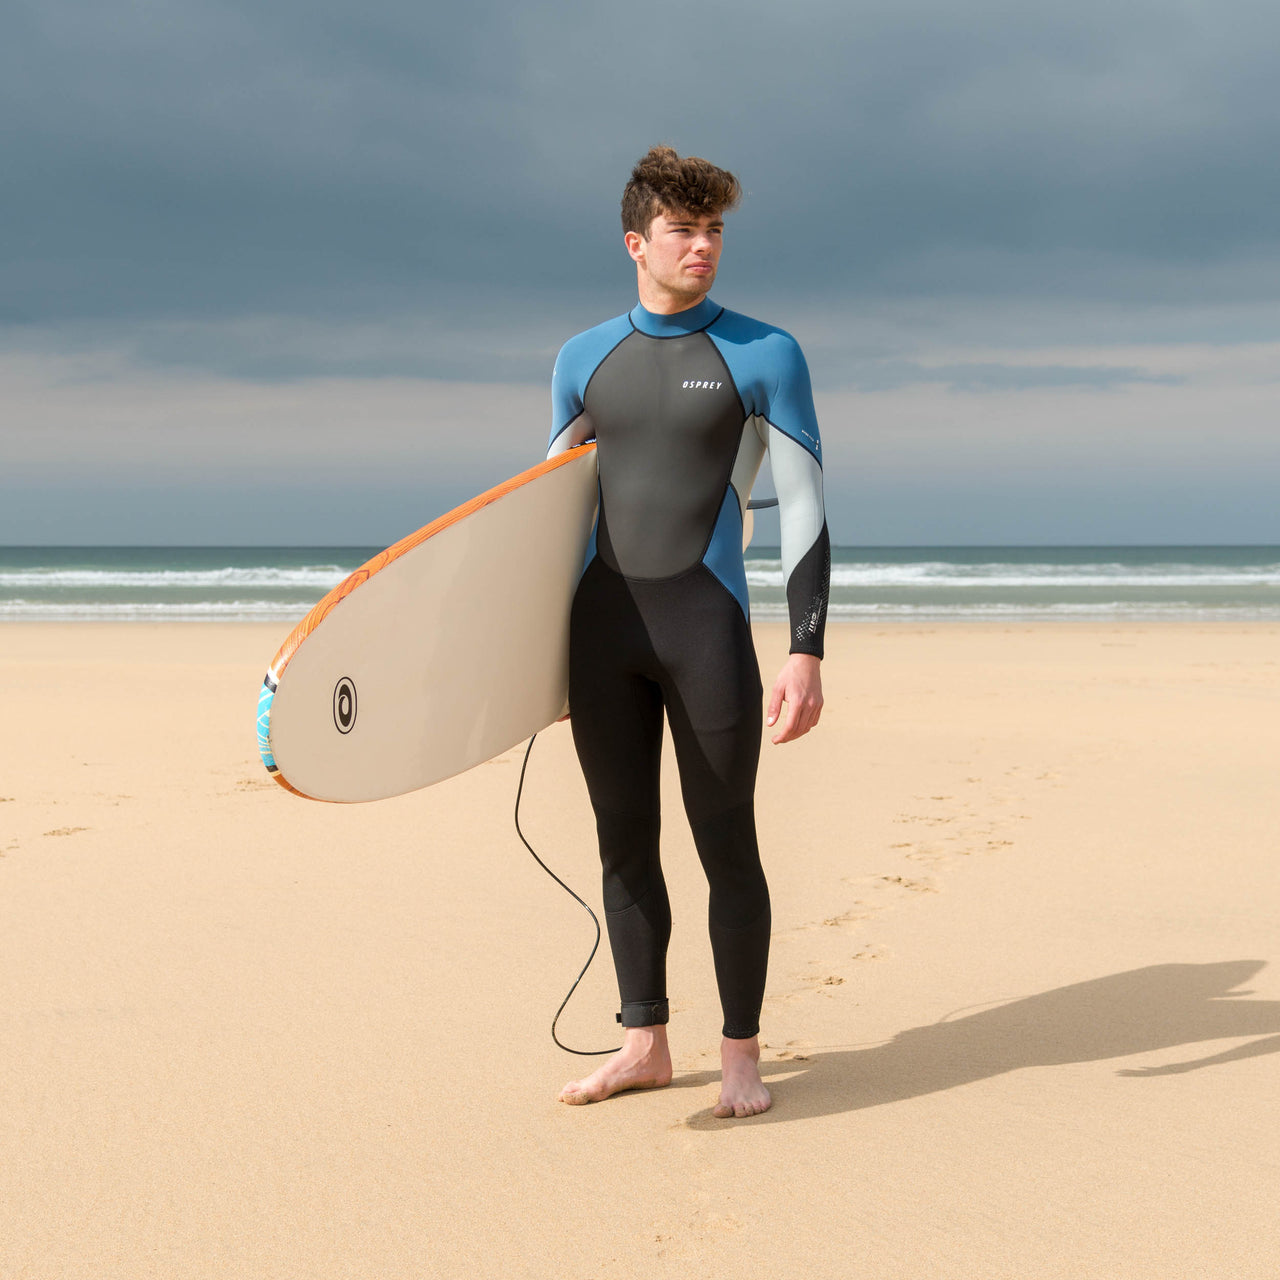 WETSUIT DISCOUNT 20% - use code WETSUIT20 at the checkout